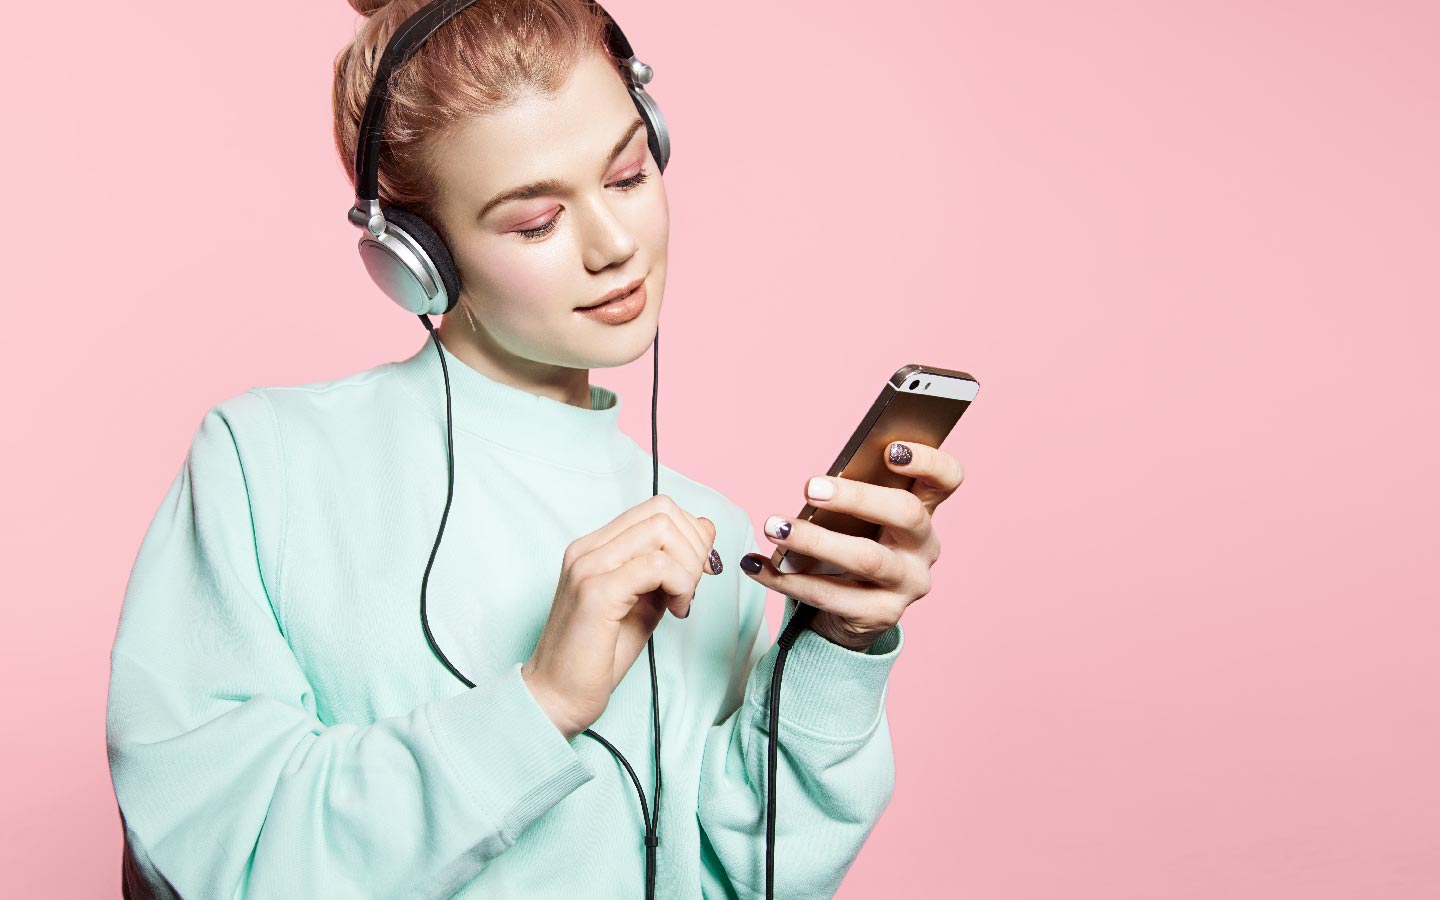 TikTok will allow users to listen to the whole songs used in videos